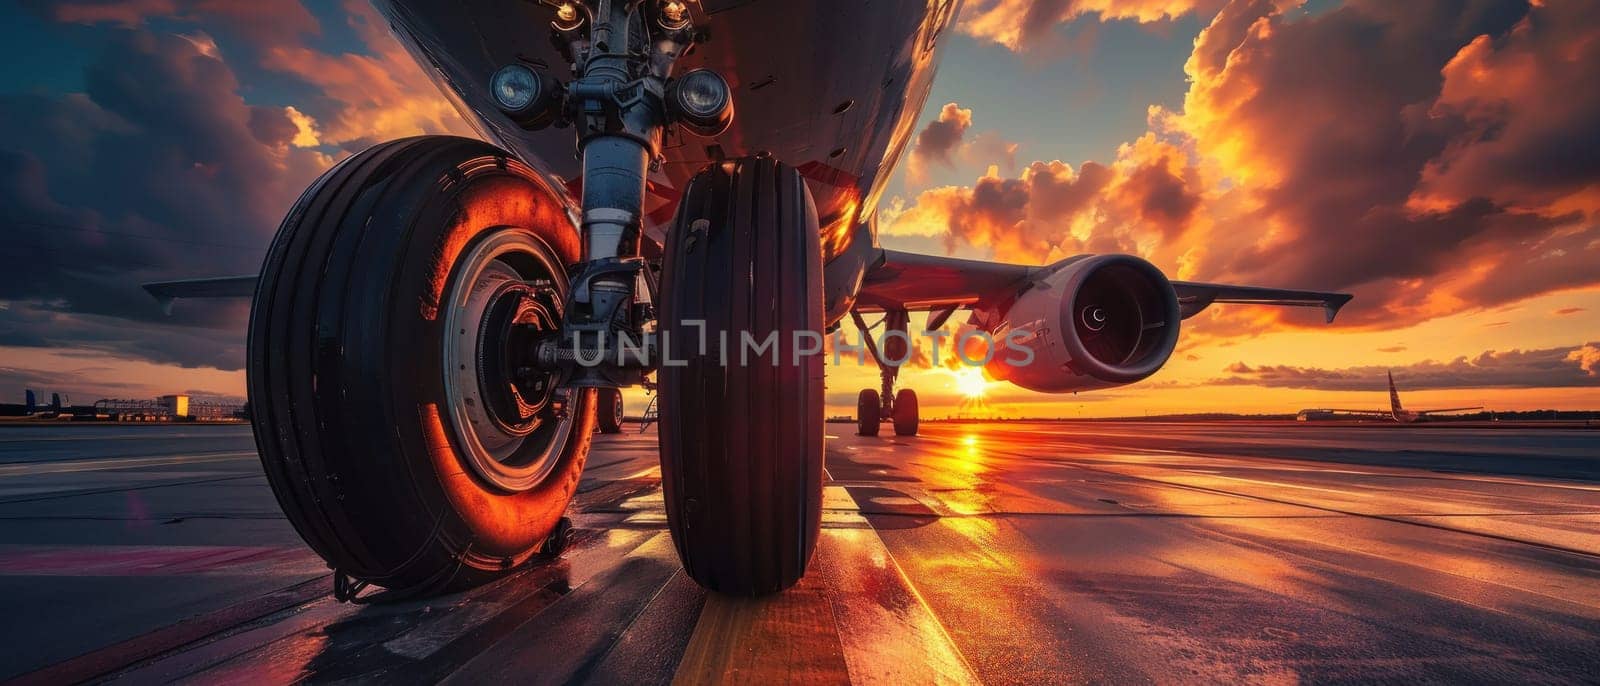 A large jet is on the runway with the sun setting in the background by golfmerrymaker